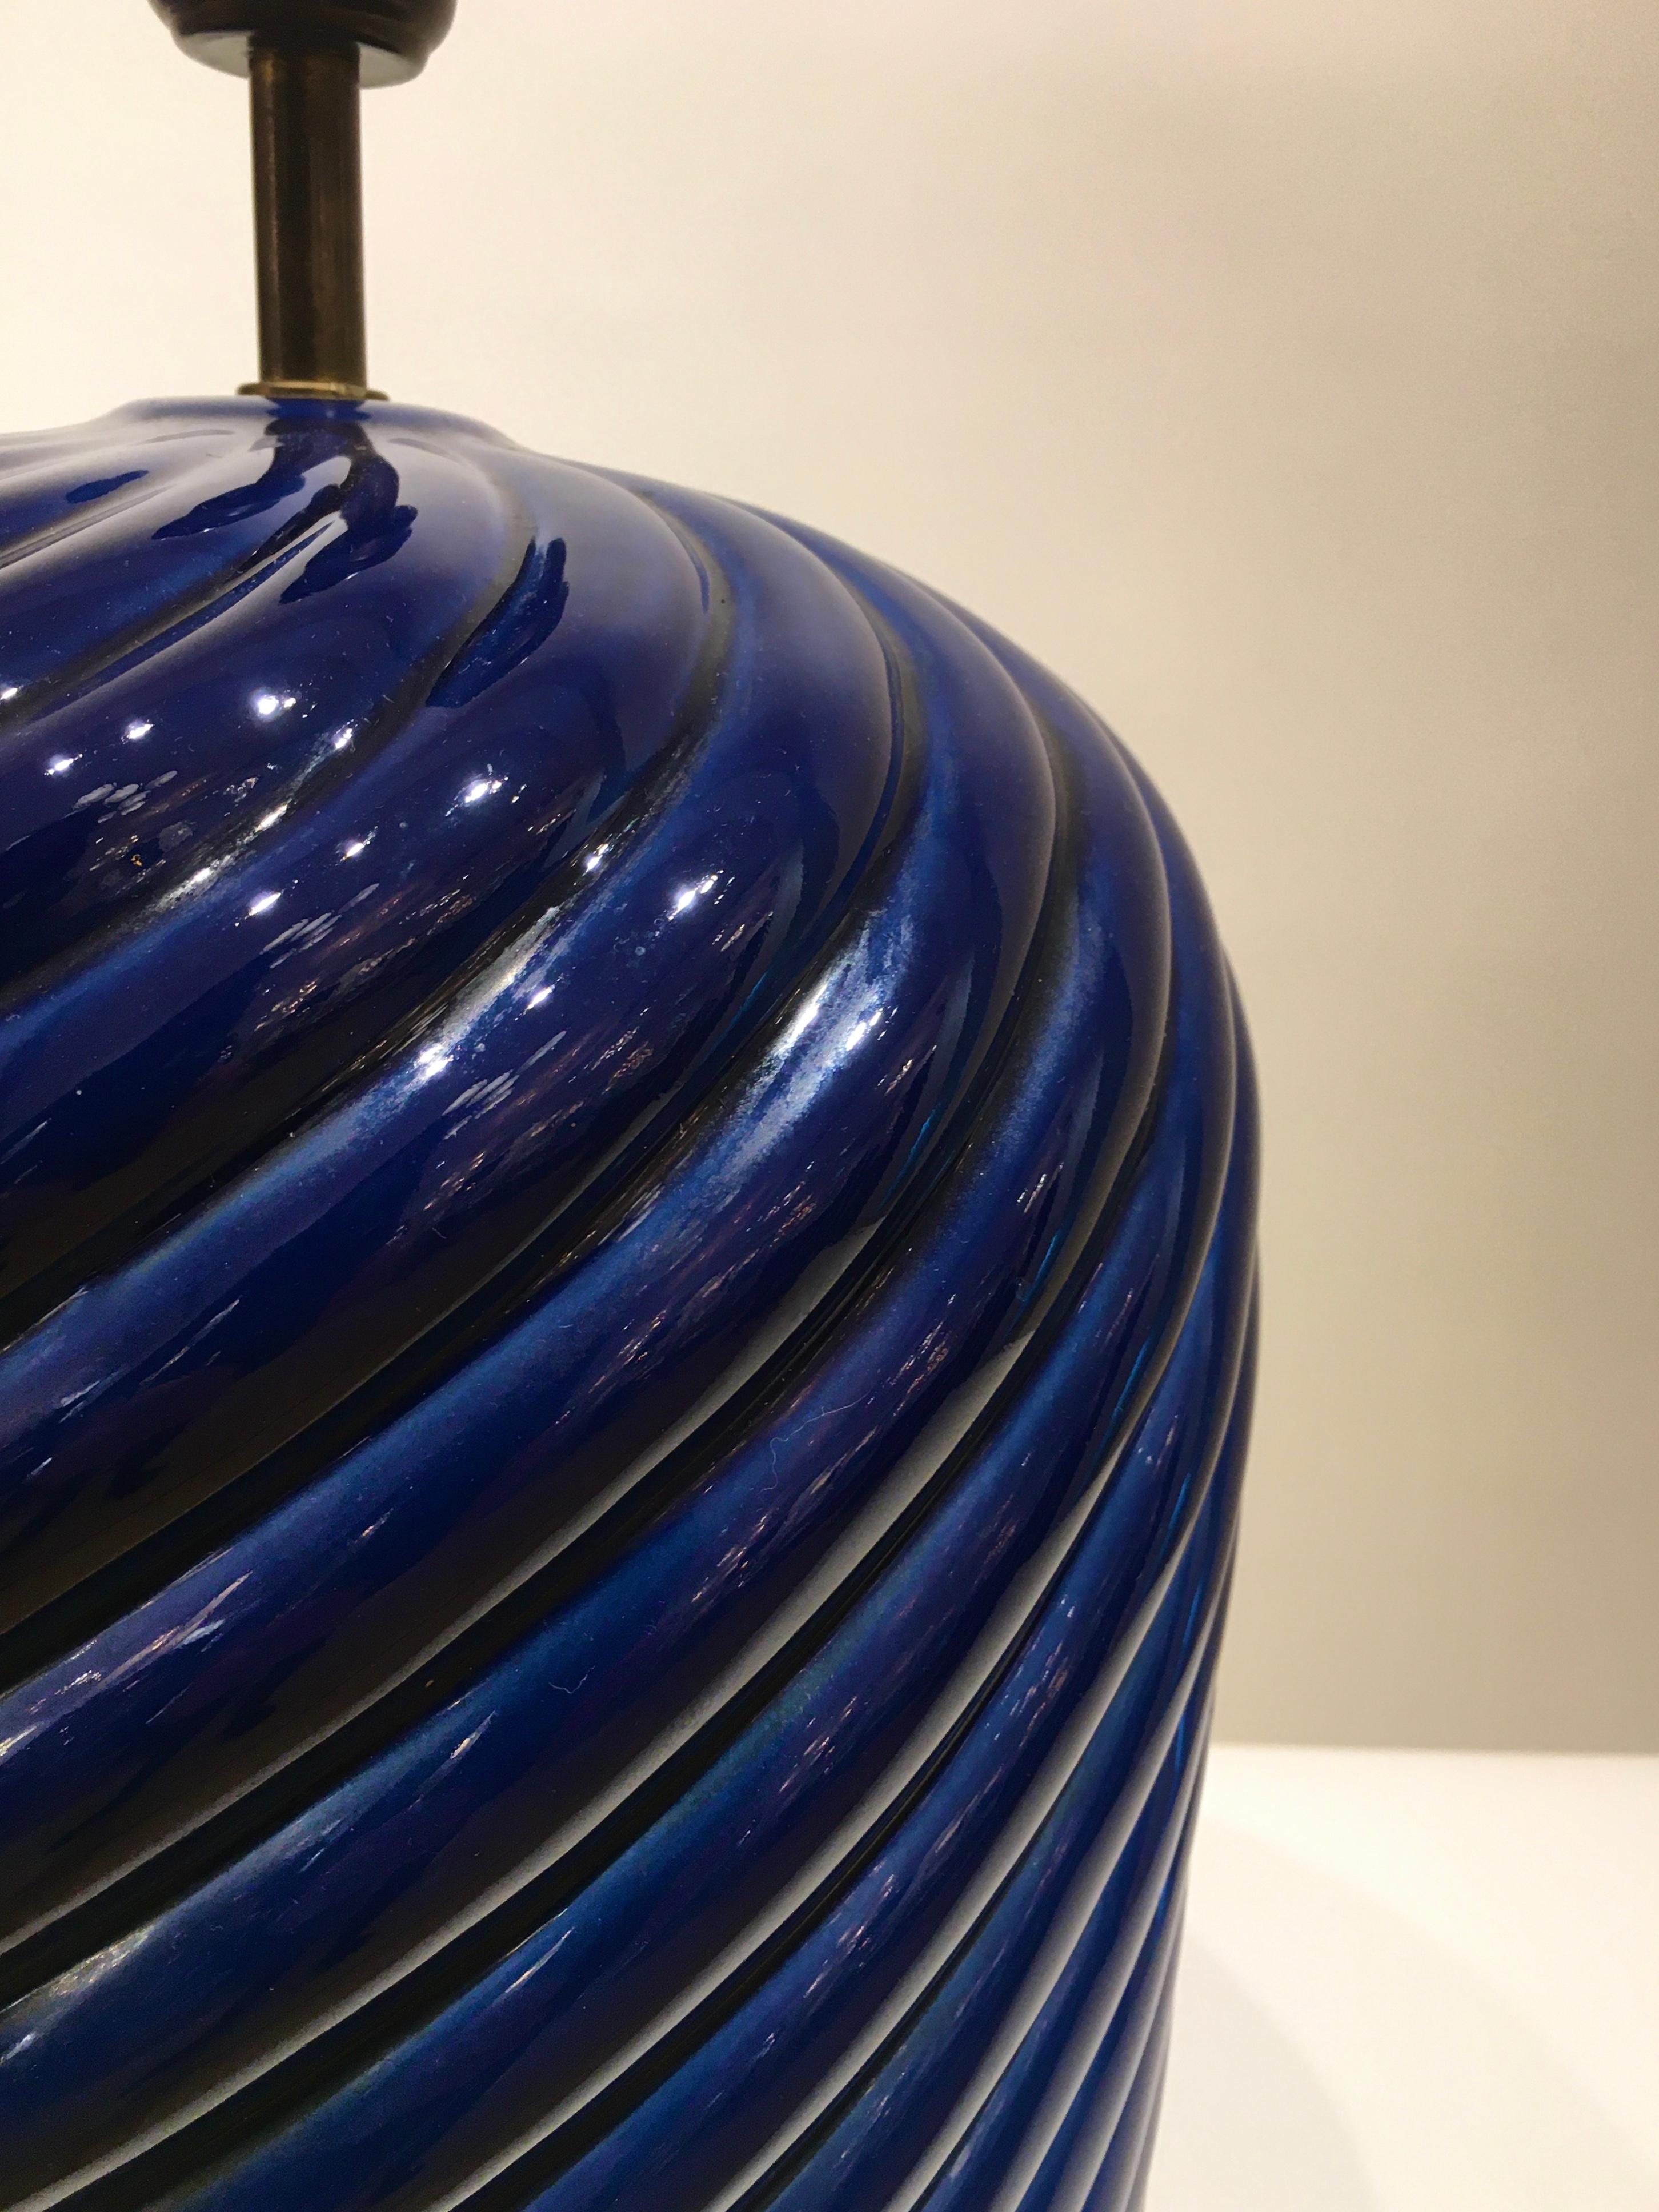 A wonderful pair of dark blue glazed ceramic table lamps designed by the Italian designer Tommaso Barbi. Manufactured by B.Ceramiche in the early 1970s, this rare blue colored example of Barbi's Classic spiral table lamp is finished at the base with